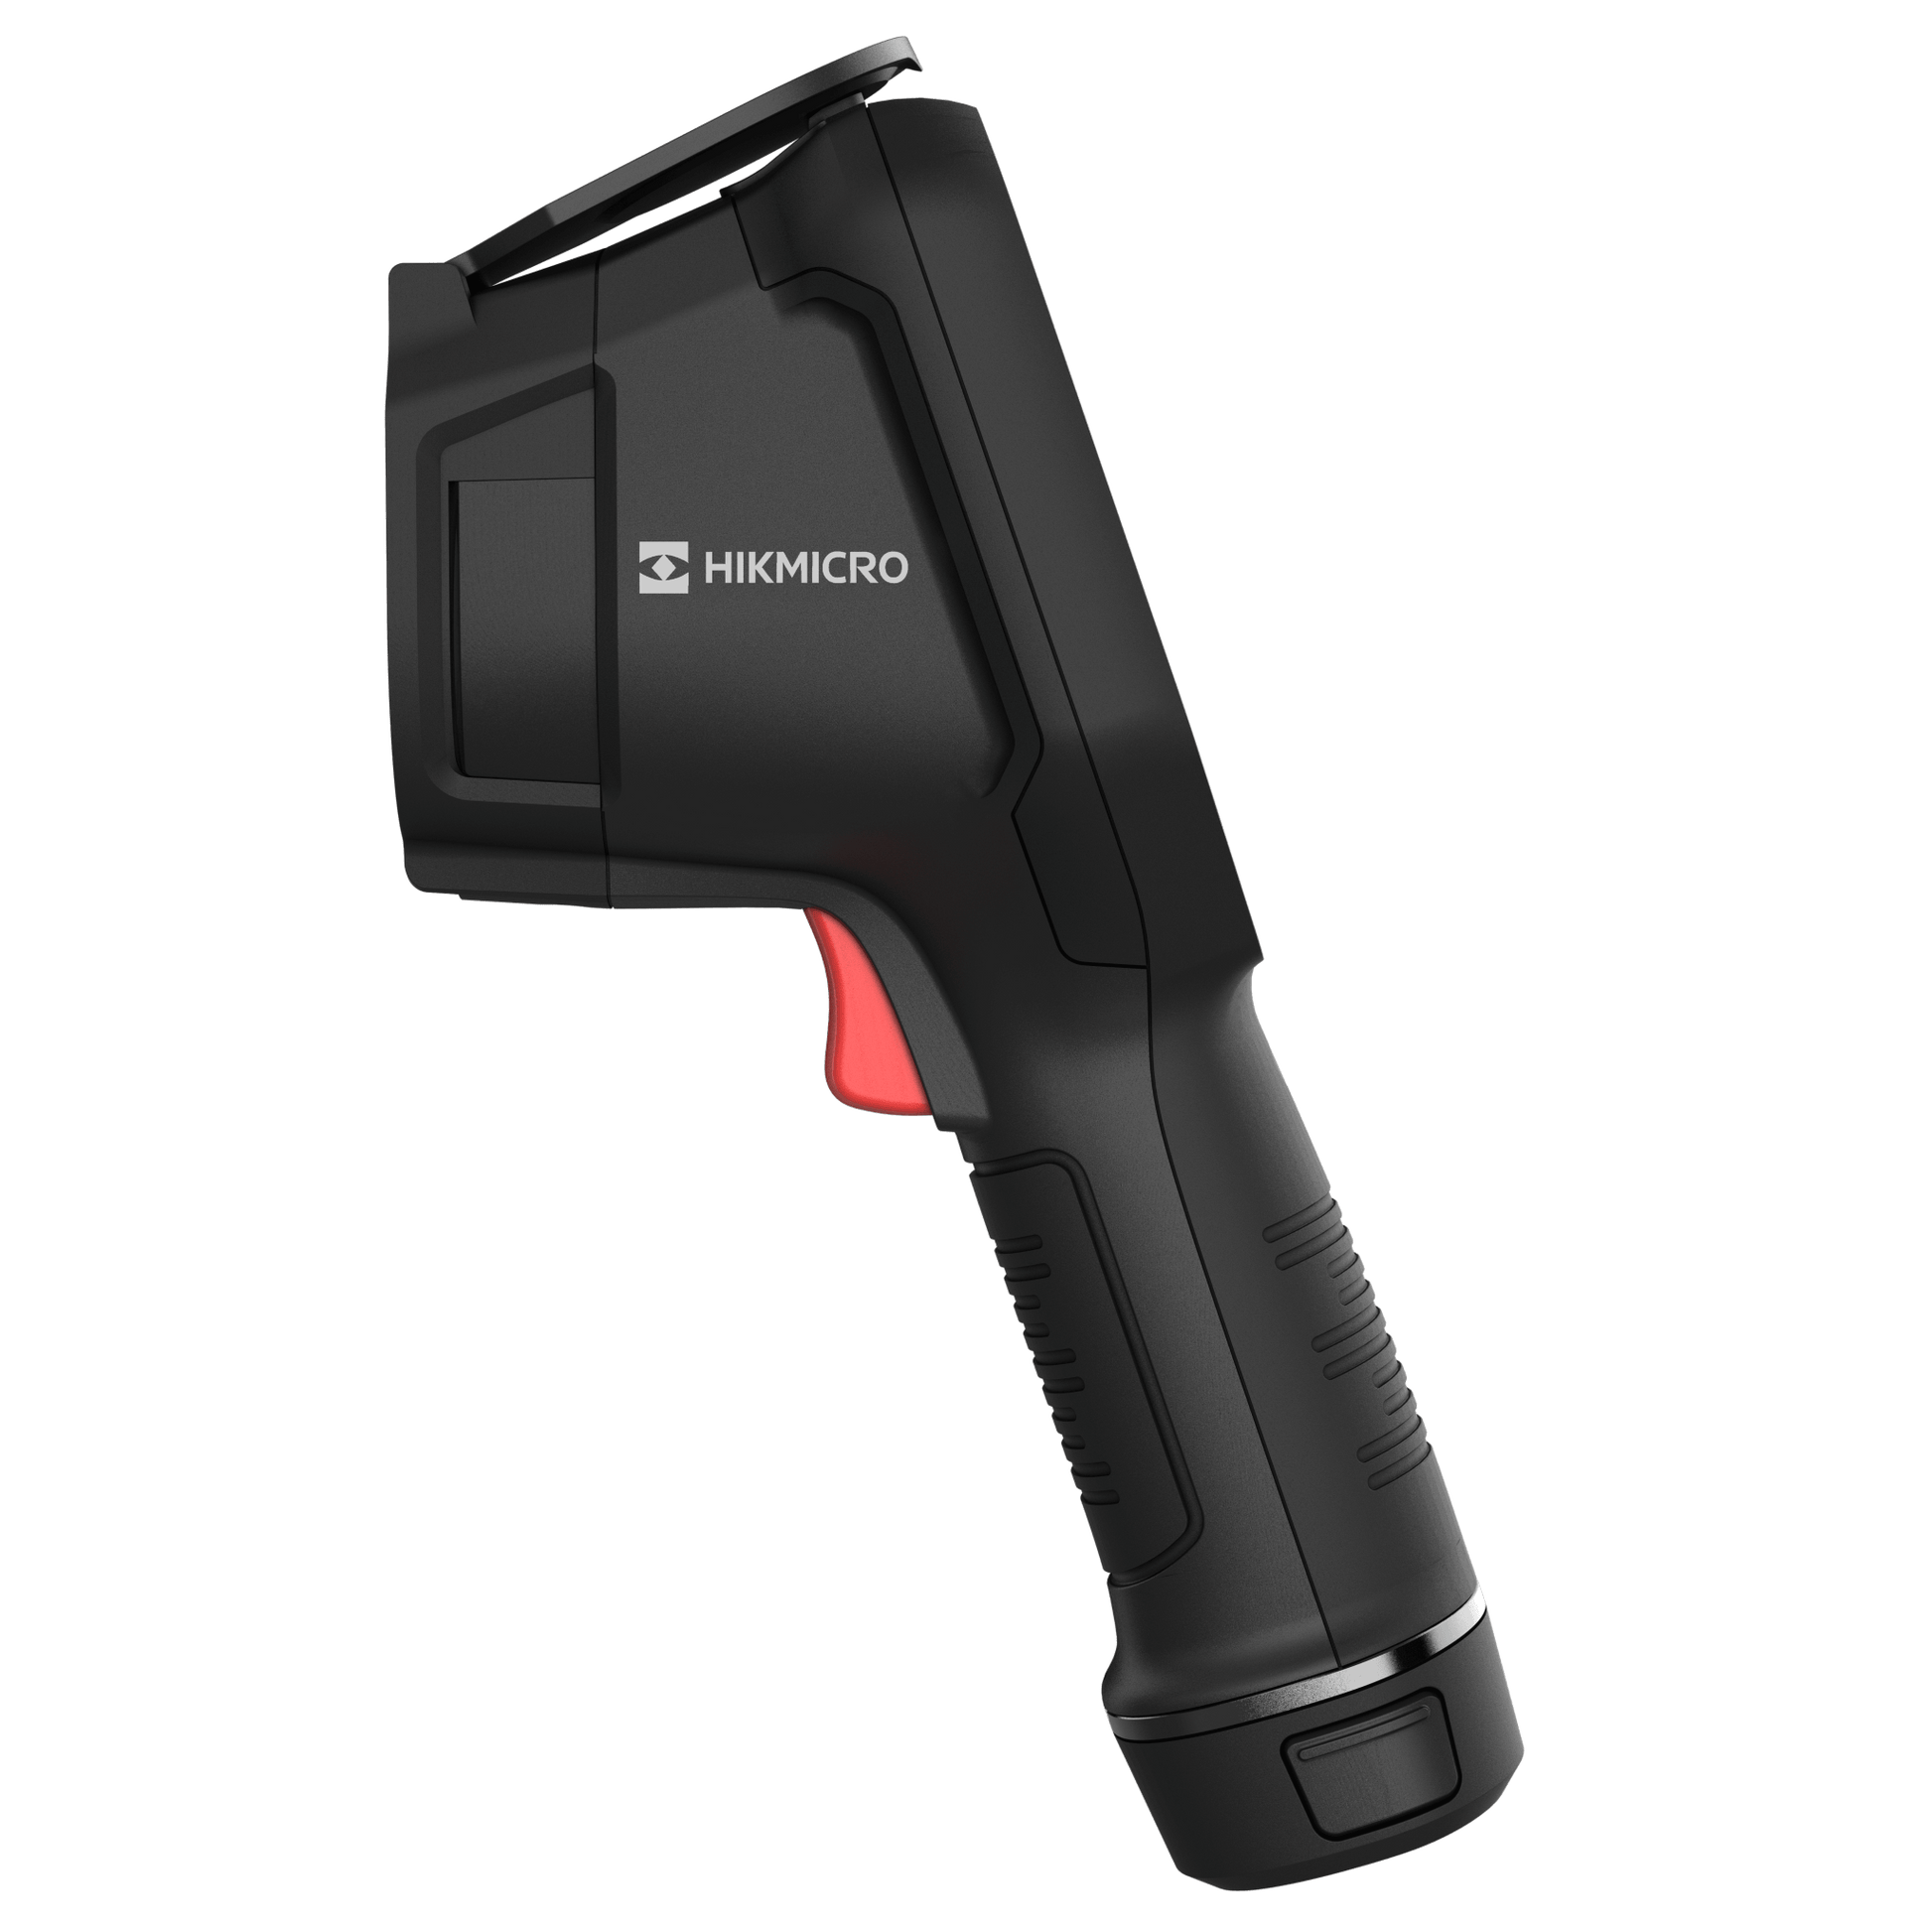 HikMicro M20W Handheld Thermography Camera on a transparent background - Side View